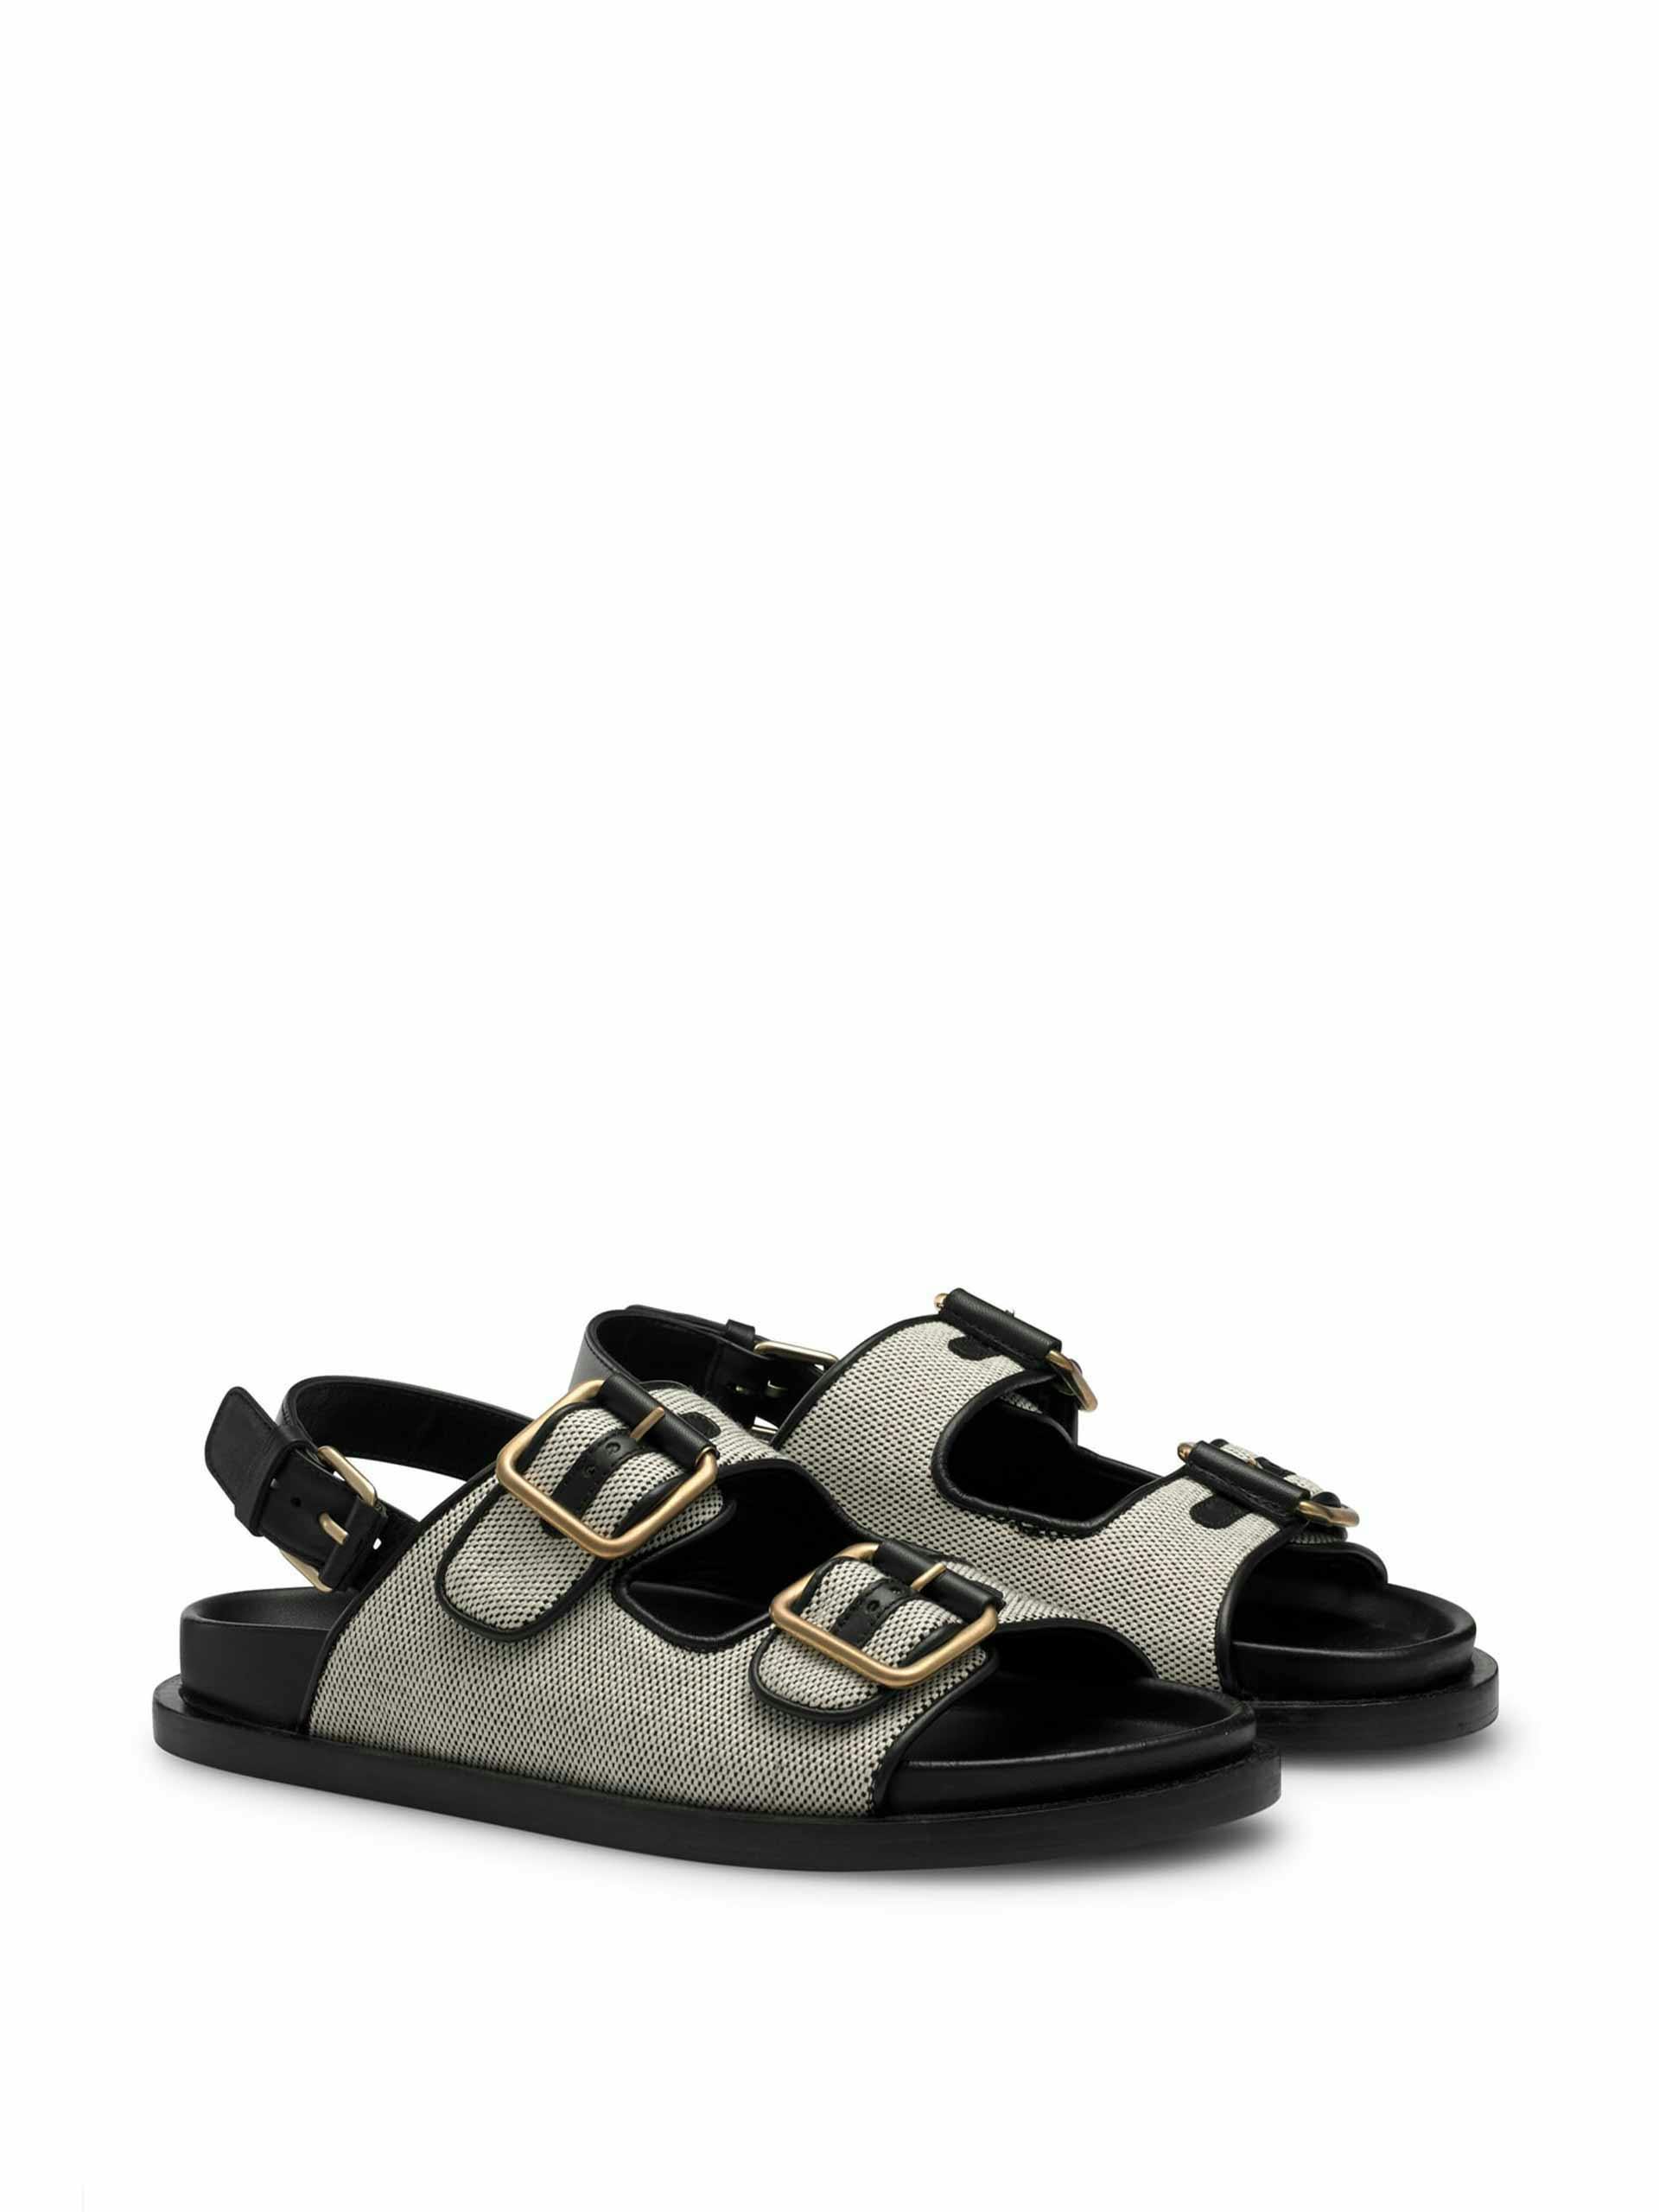 Black and white sandals